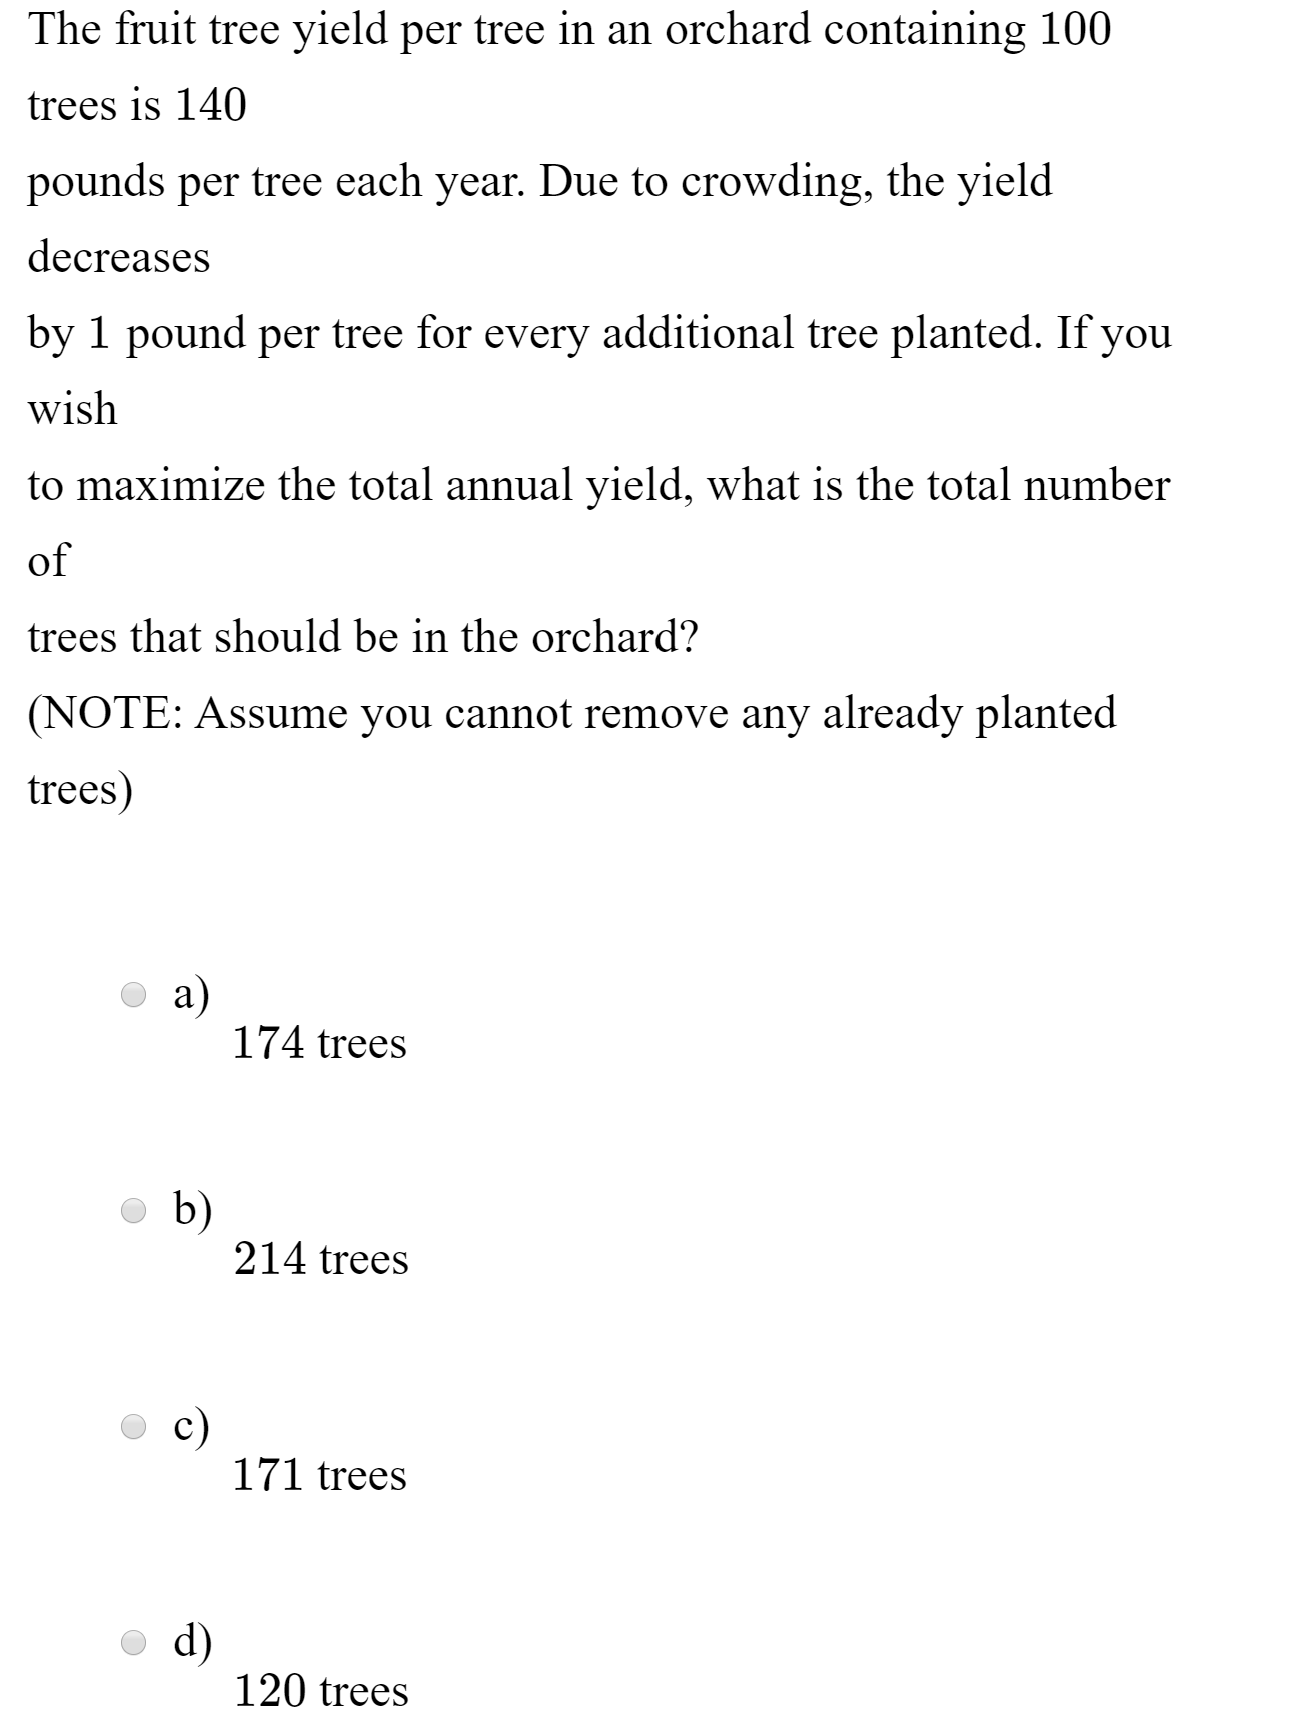 The fruit tree yield per tree in an orchard containing 100
trees is 140
pounds per tree each year. Due to crowding, the yield
decreases
by 1 pound per tree for every additional tree planted. If you
wish
to maximize the total annual yield, what is the total number
of
trees that should be in the orchard?
(NOTE: Assume you cannot remove any already planted
trees)
